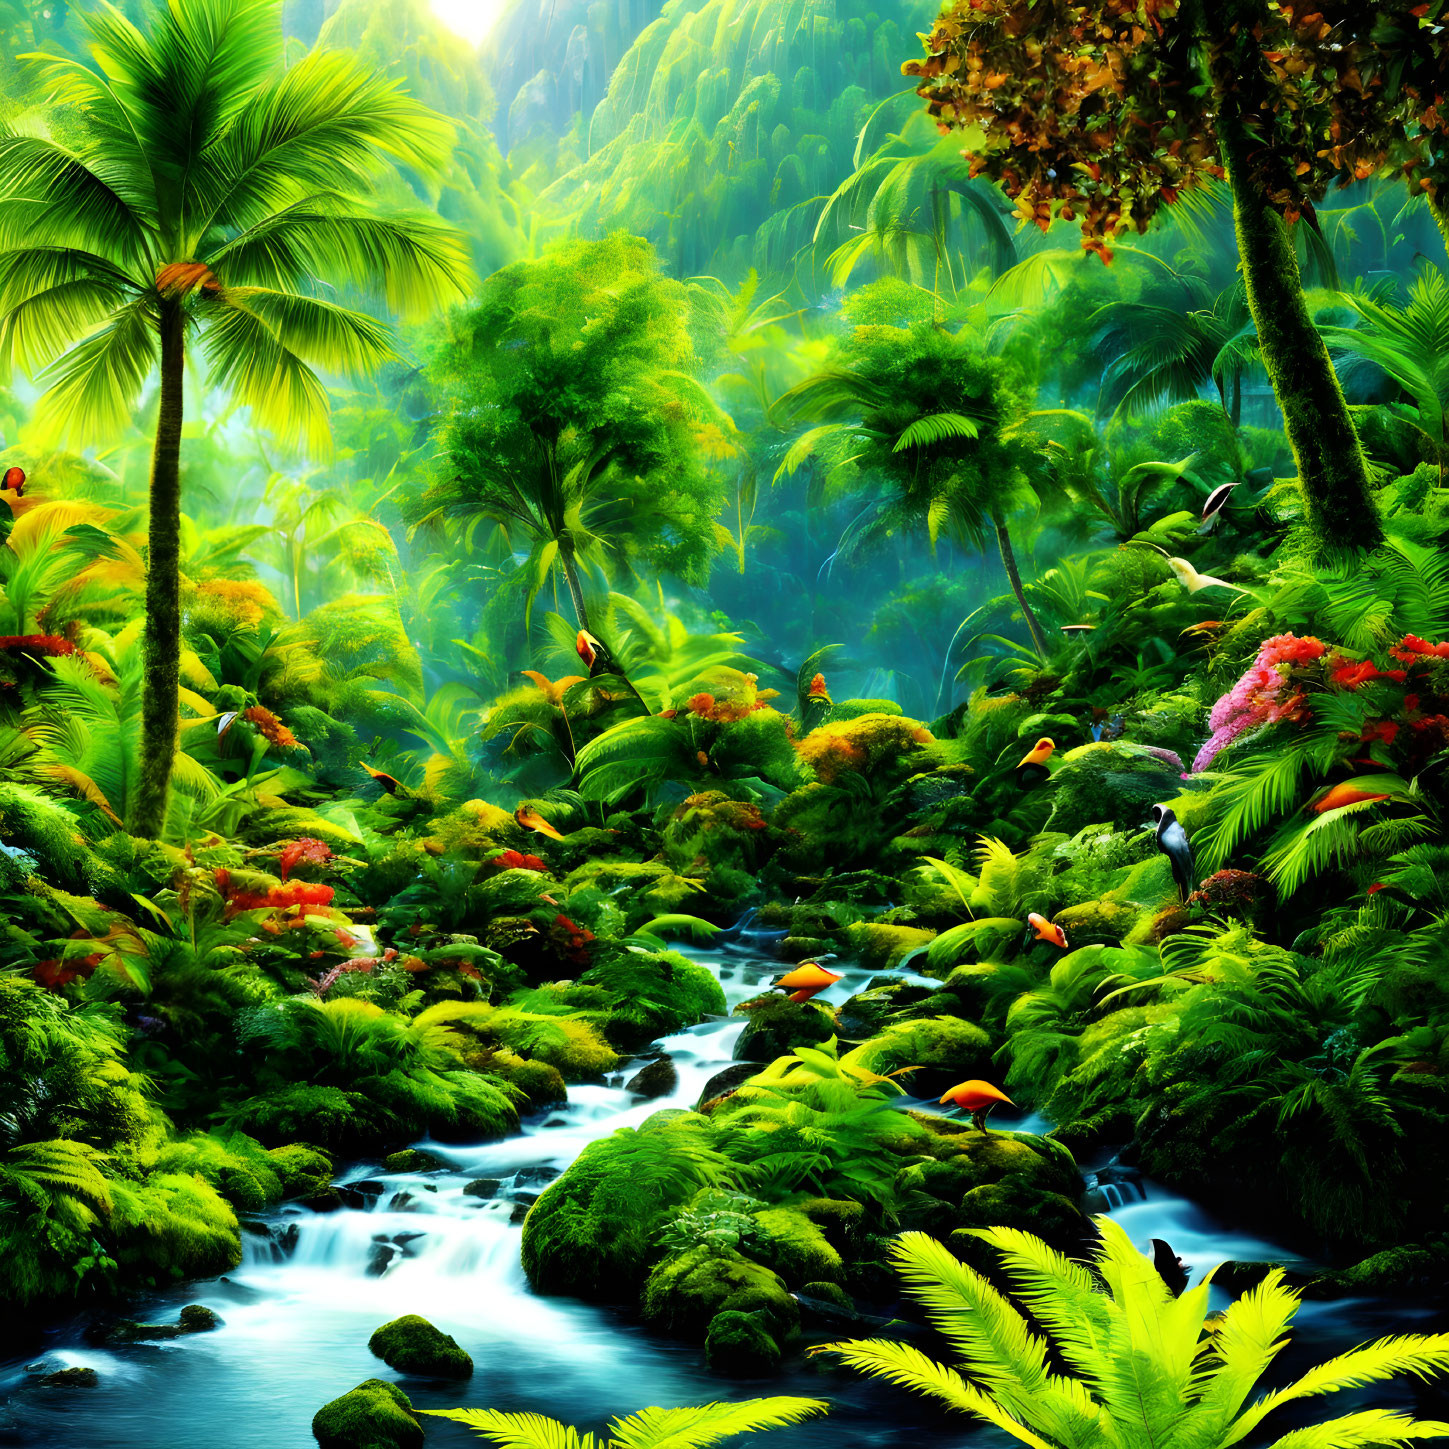 Lush Tropical Rainforest with Stream and Colorful Birds